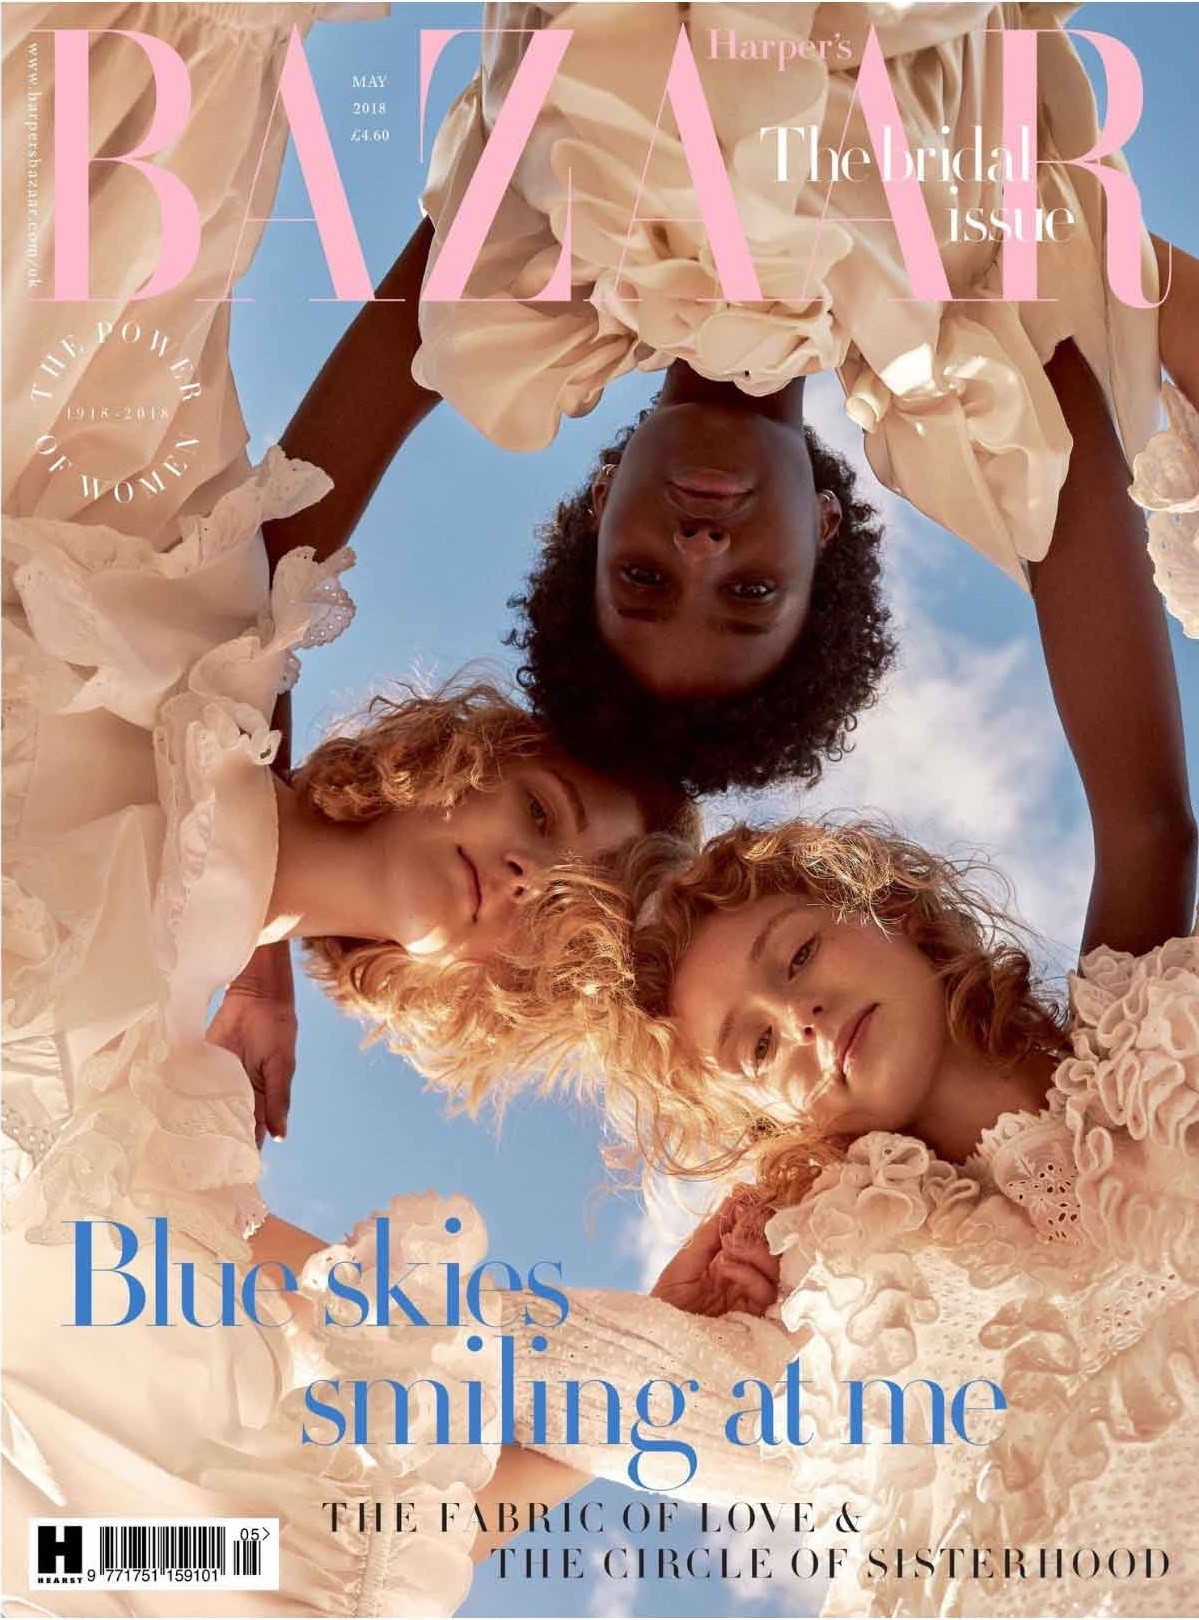 179 British Harper’s Bazaar Covers – History of Fashion in Pictures